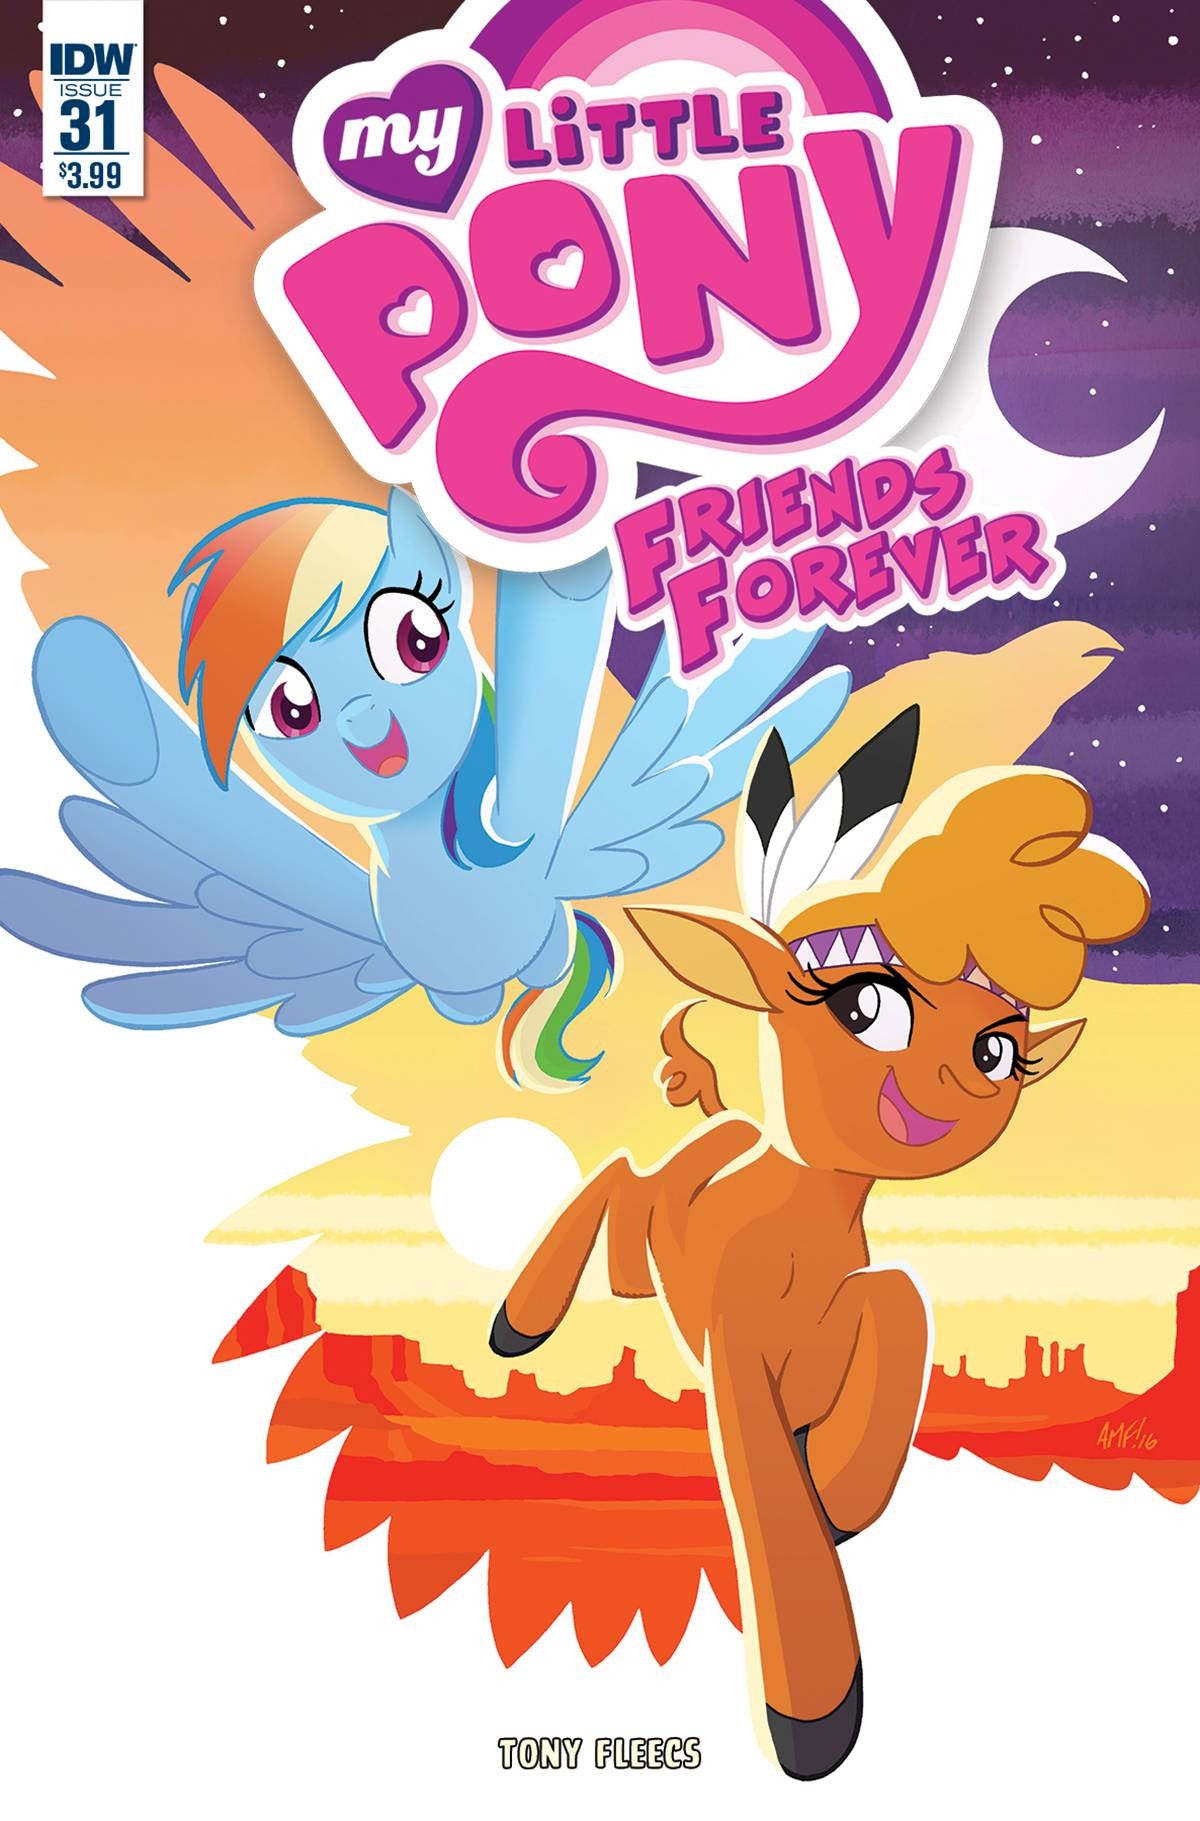 MY LITTLE PONY FRIENDS FOREVER #31 COVER